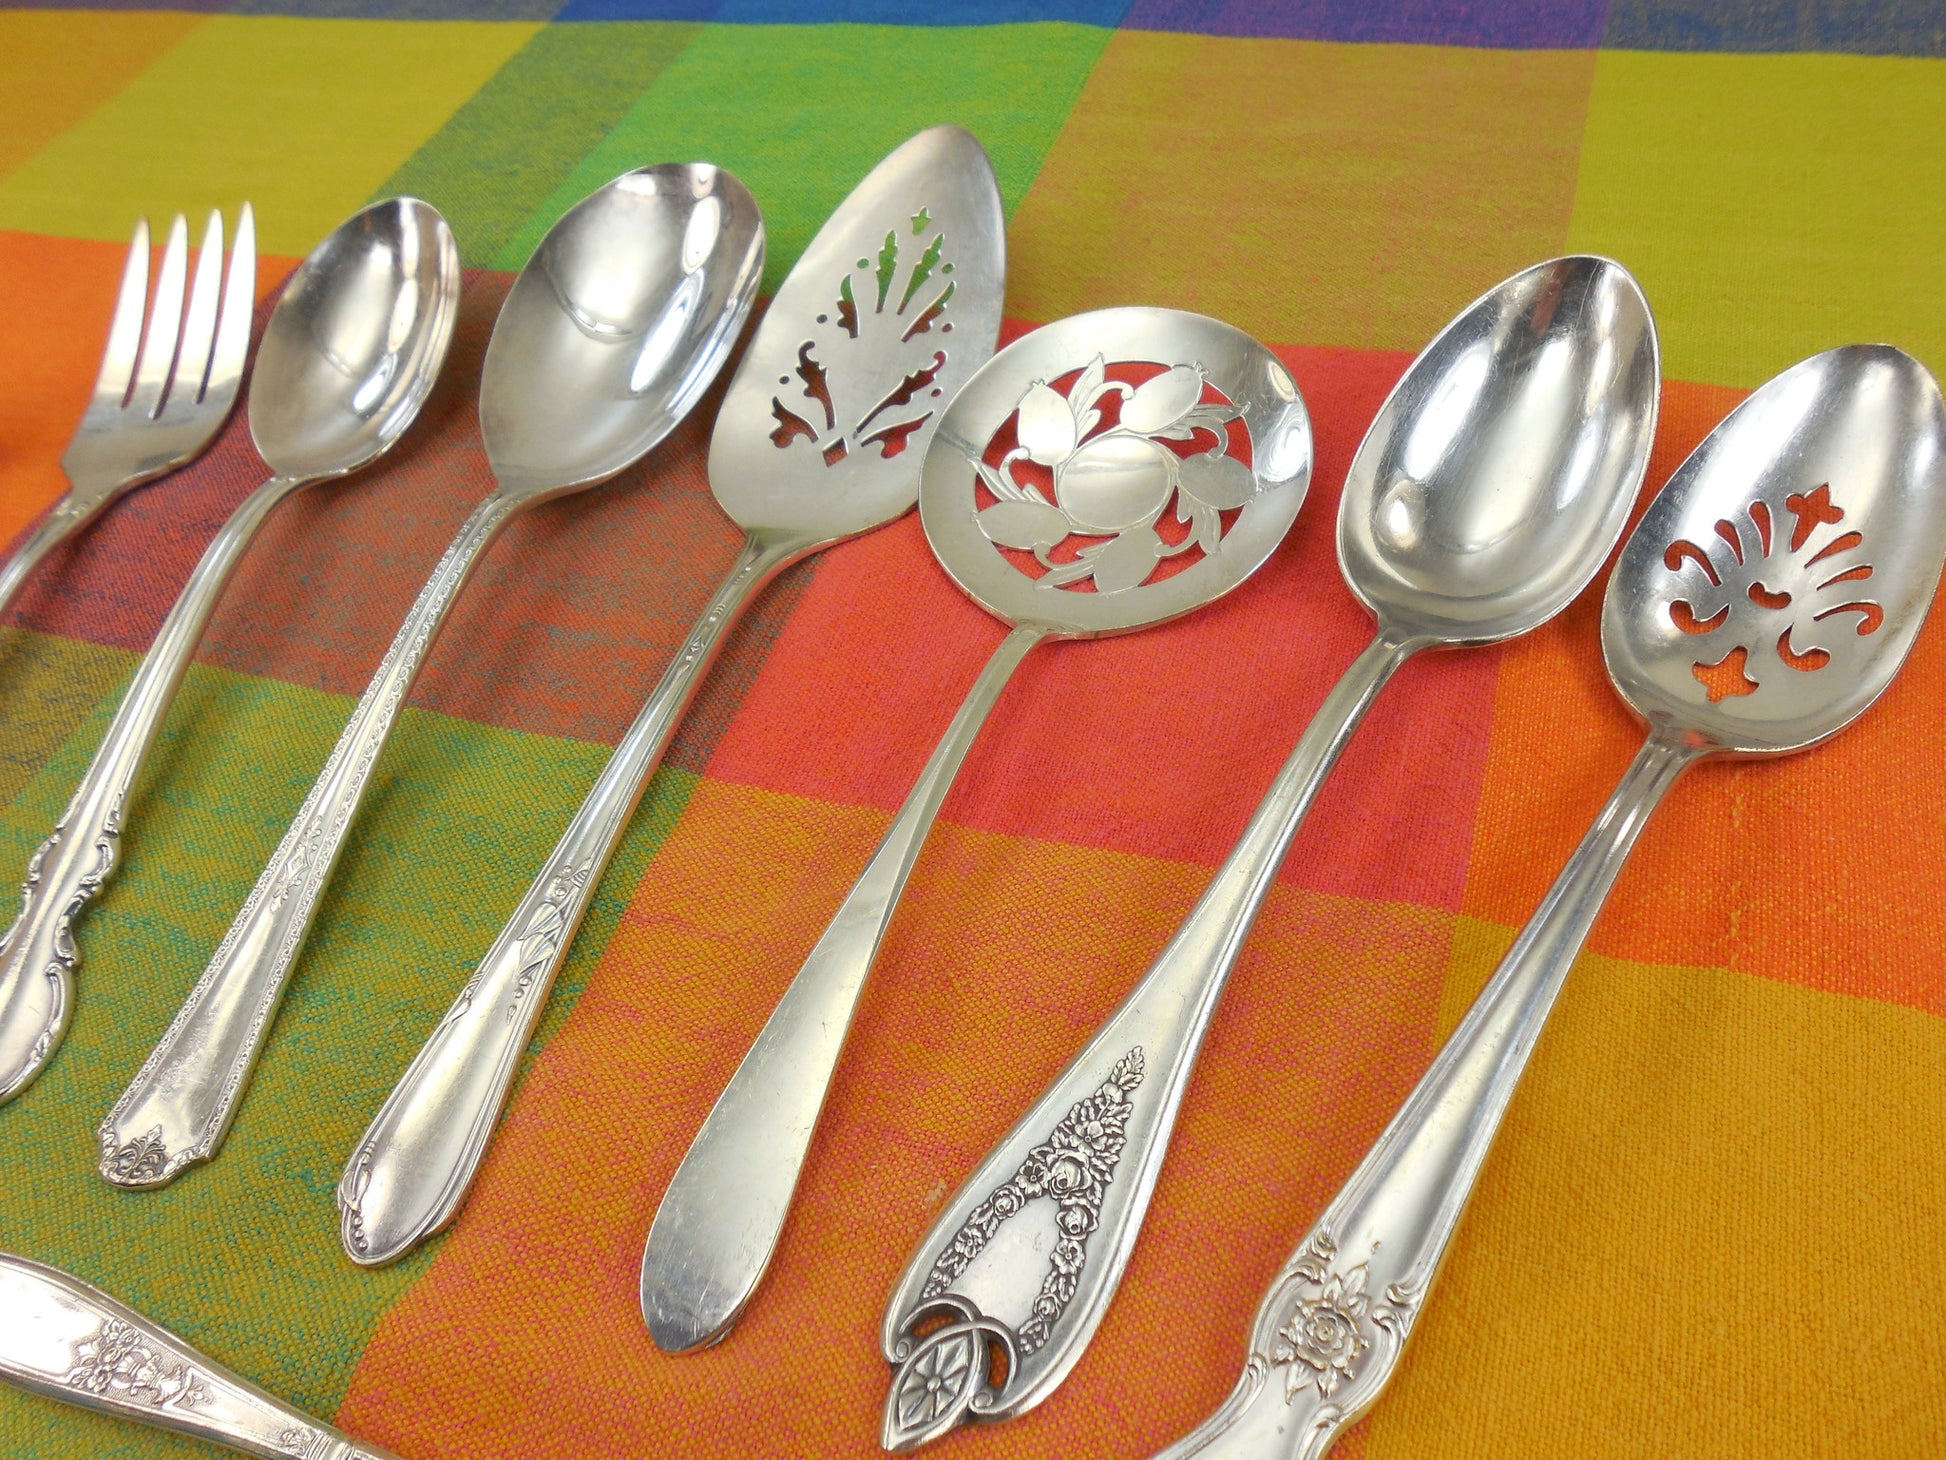 12 Piece Mismatched Serving Set - Cottage Chic Floral Traditional Edwardian Silverplate Flatware... Antique Silverware... large spoons